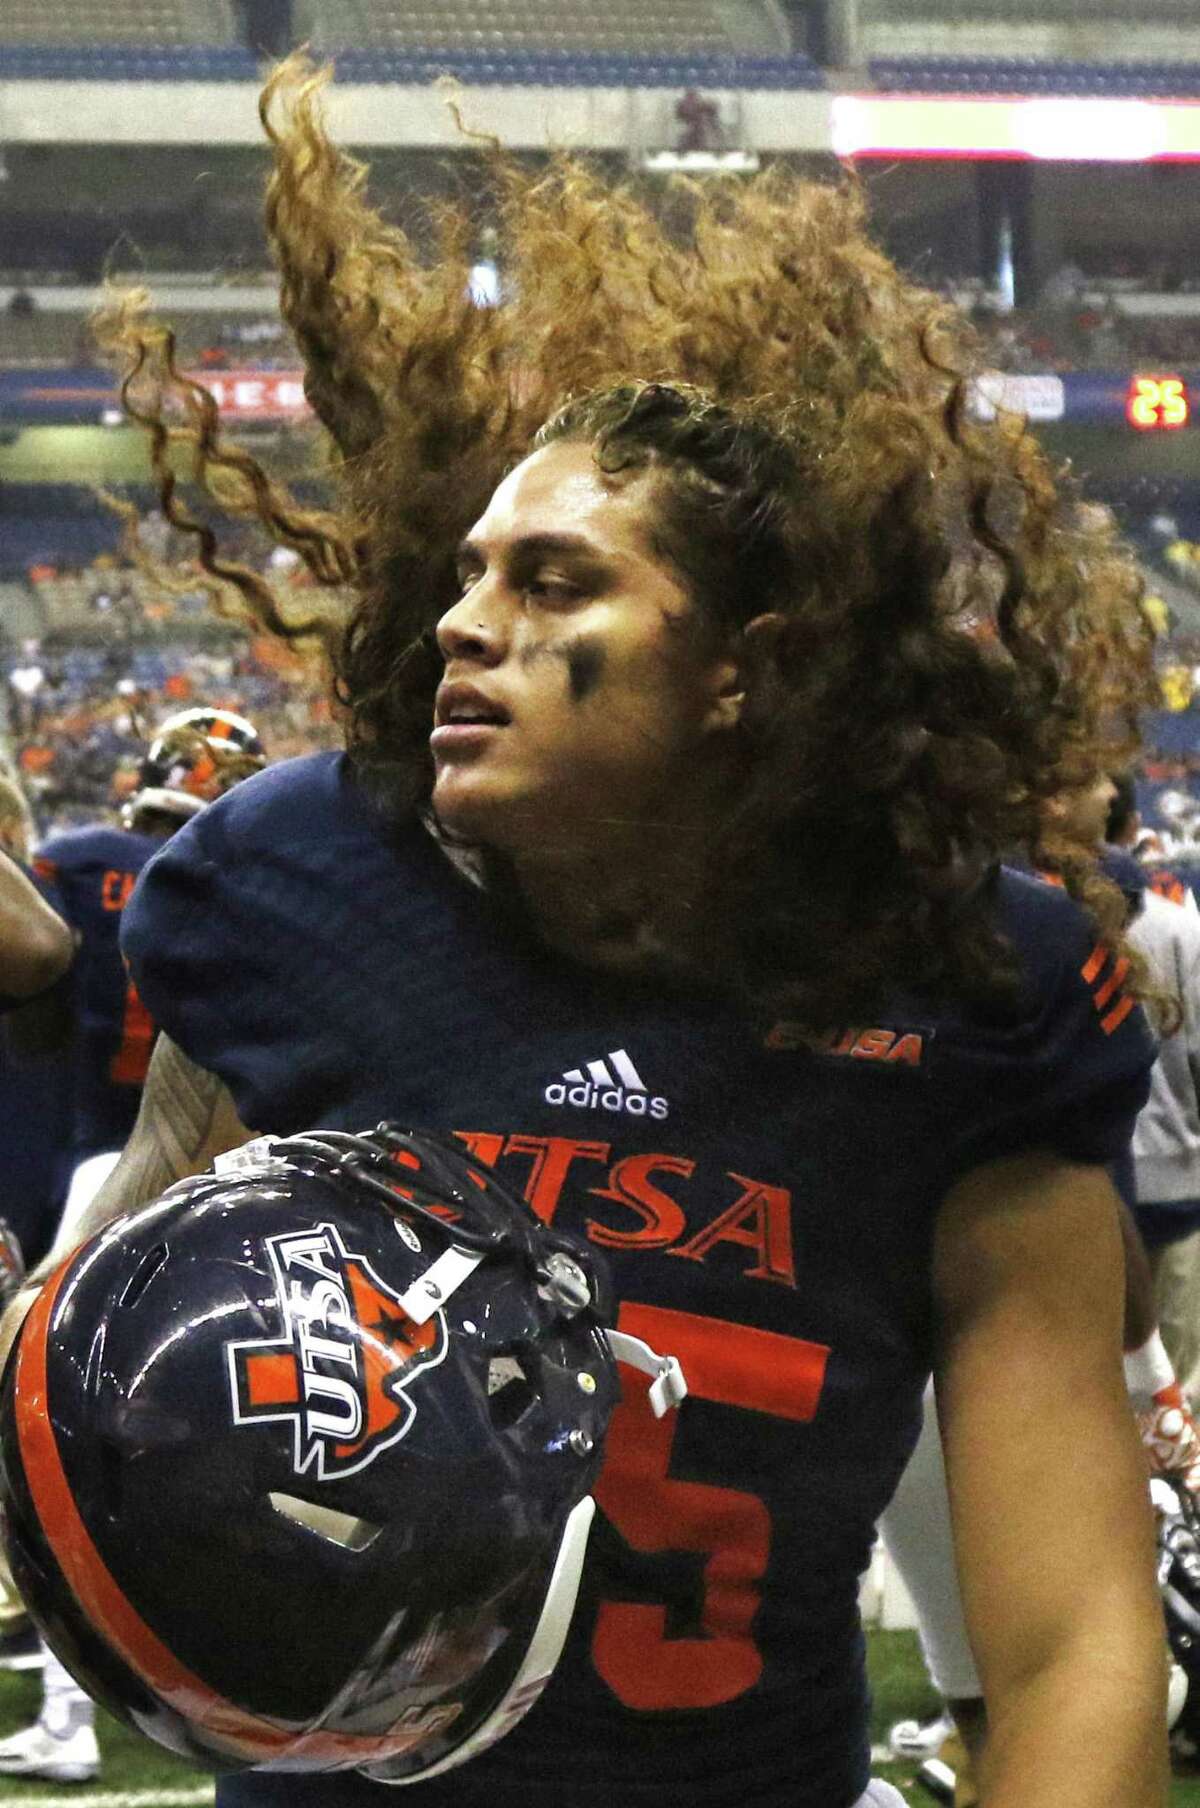 UTSA’s Josiah Tauaefa shakes his long hair on the sidelines during the game against Southern Miss at the Alamodome on Oct. 8, 2016